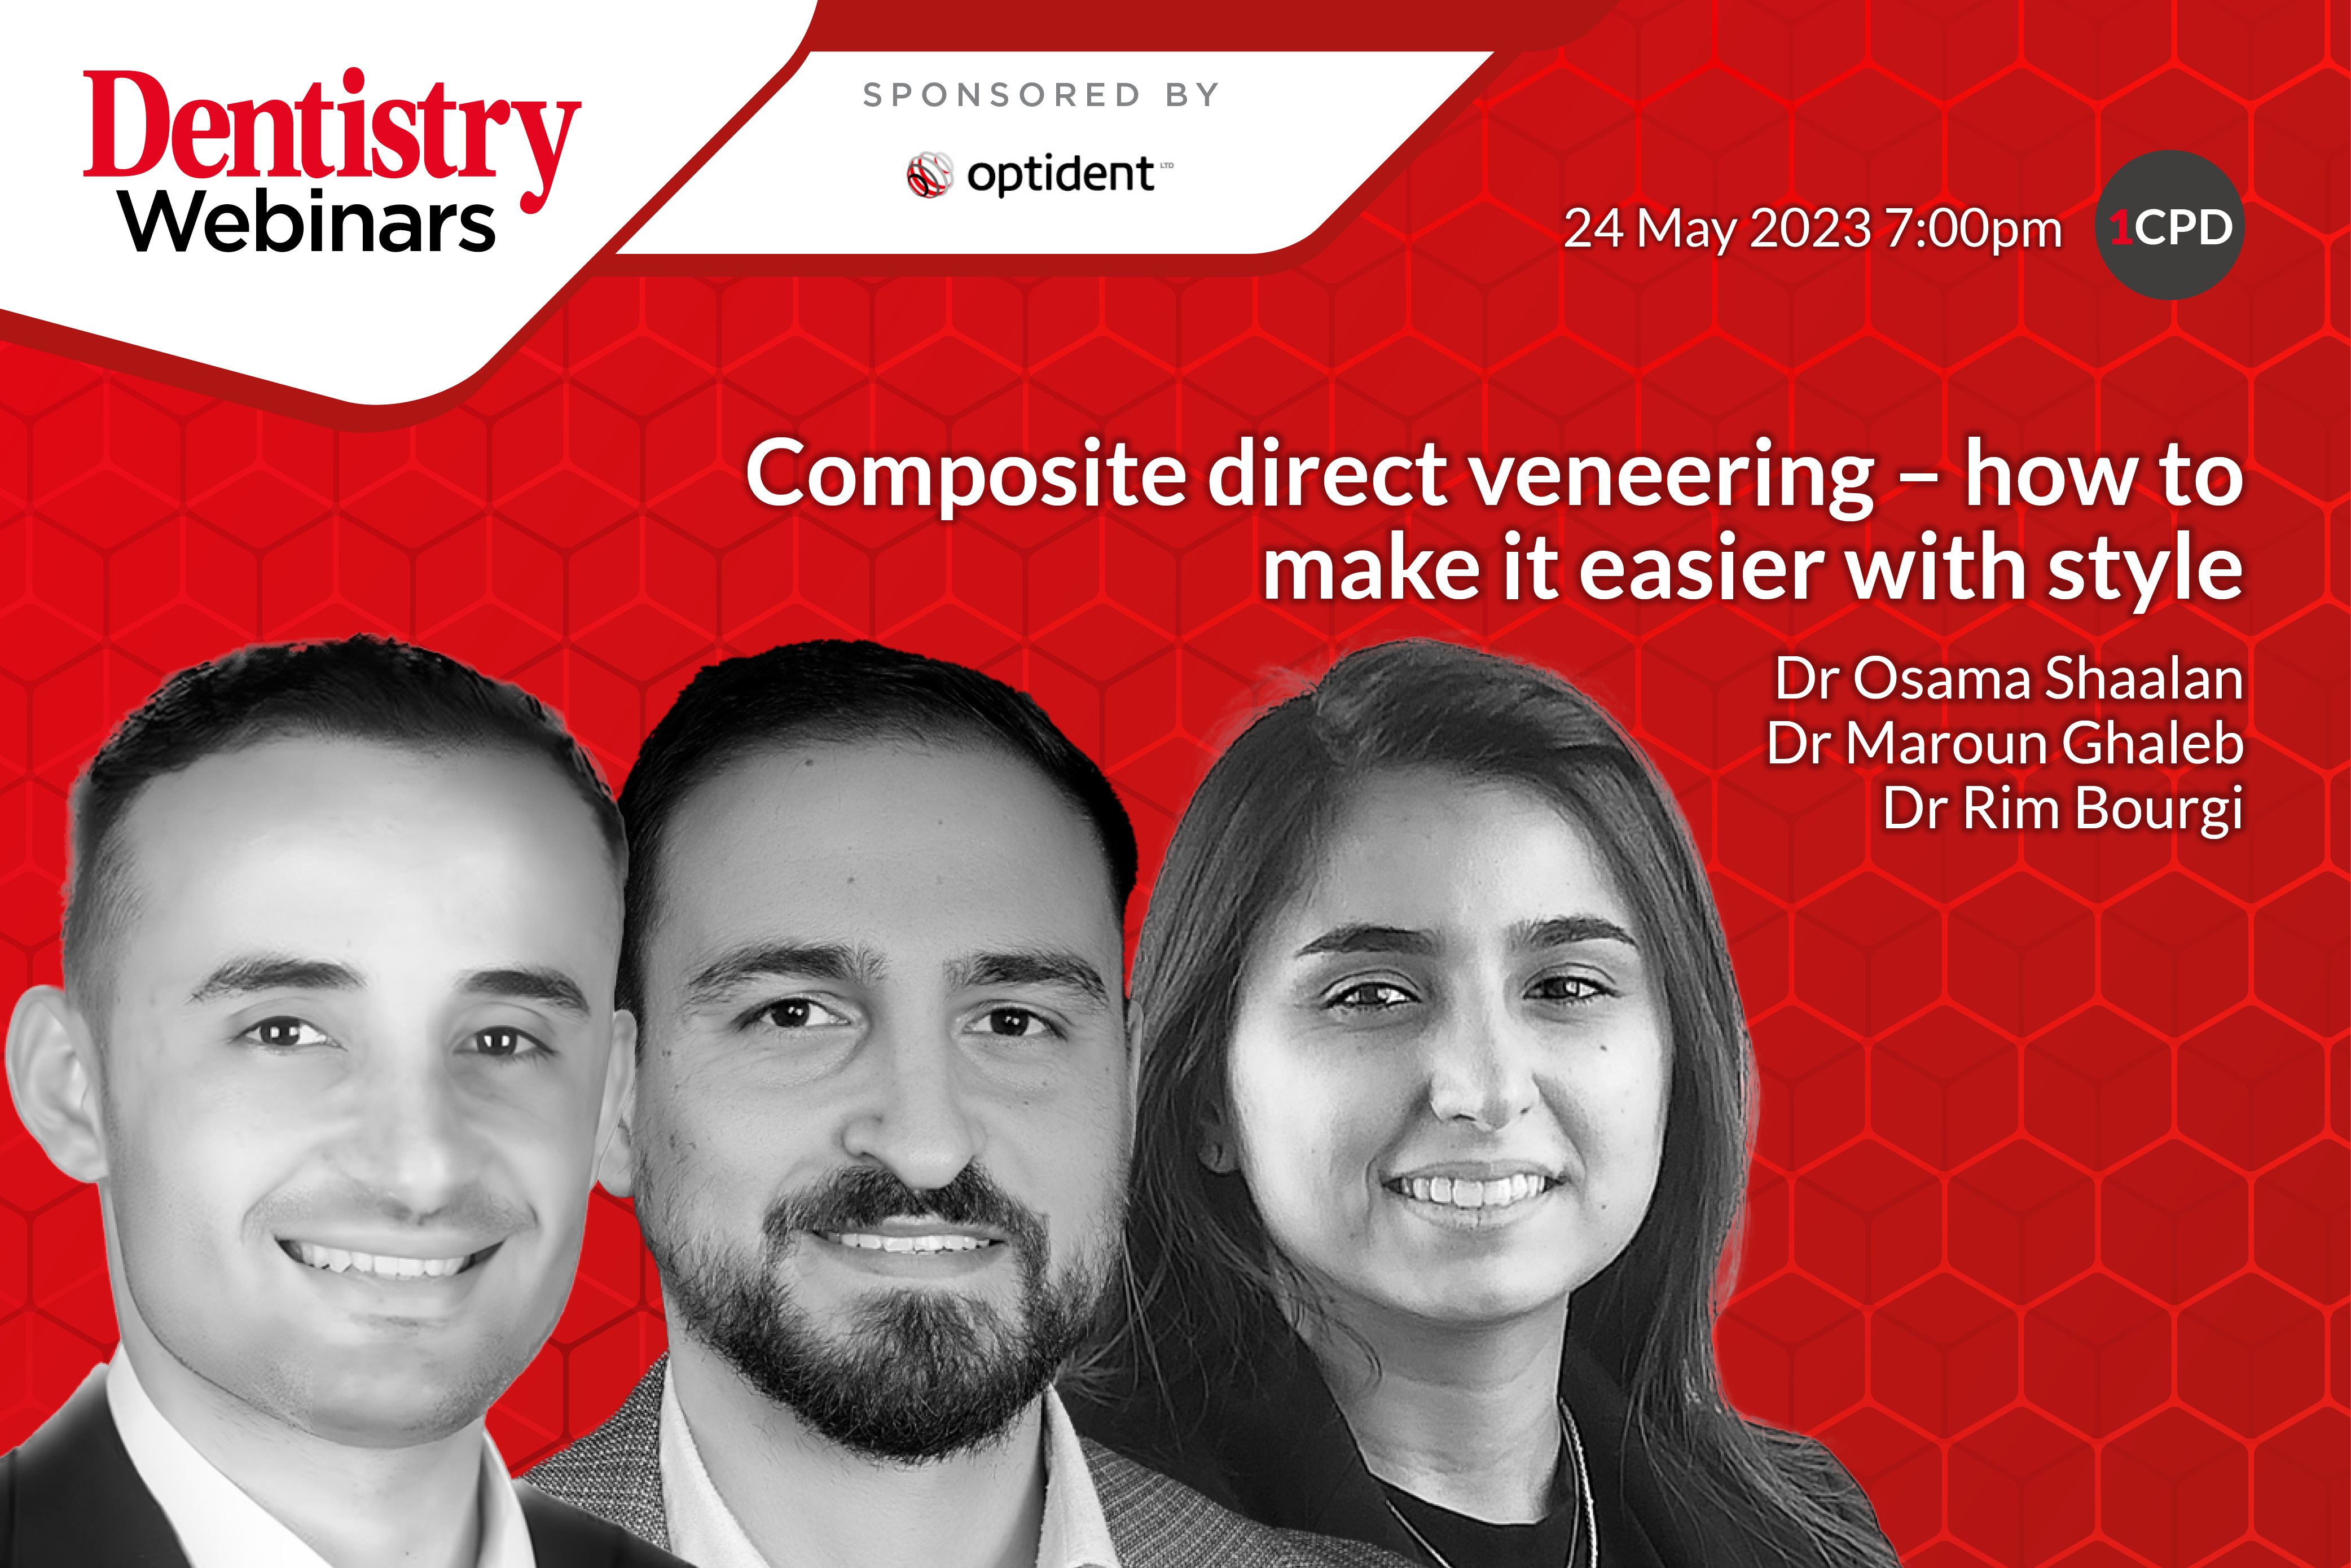 Join Drs Osama Shaalab, Maround Ghaleb and Rim Bourgi as they discuss how make composite direct veneering easier – with style! Sign up now. 